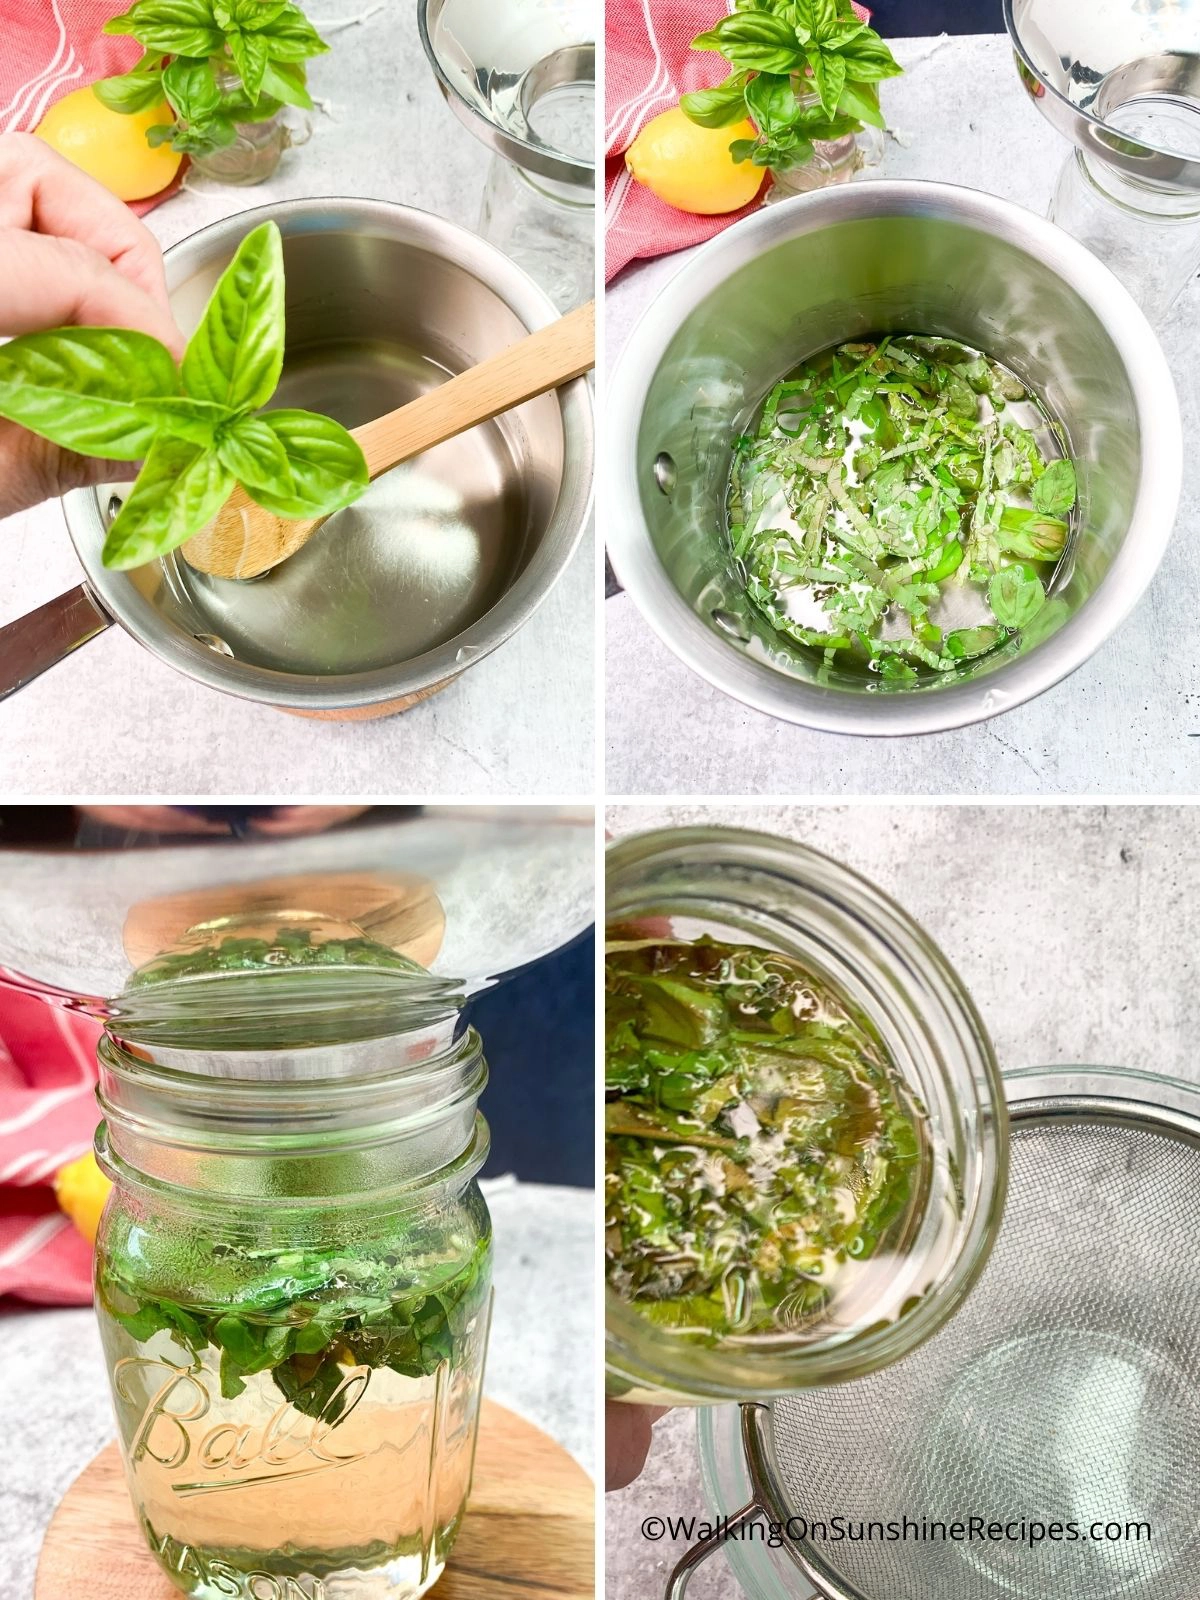 Add basil leaves to simple syrup.